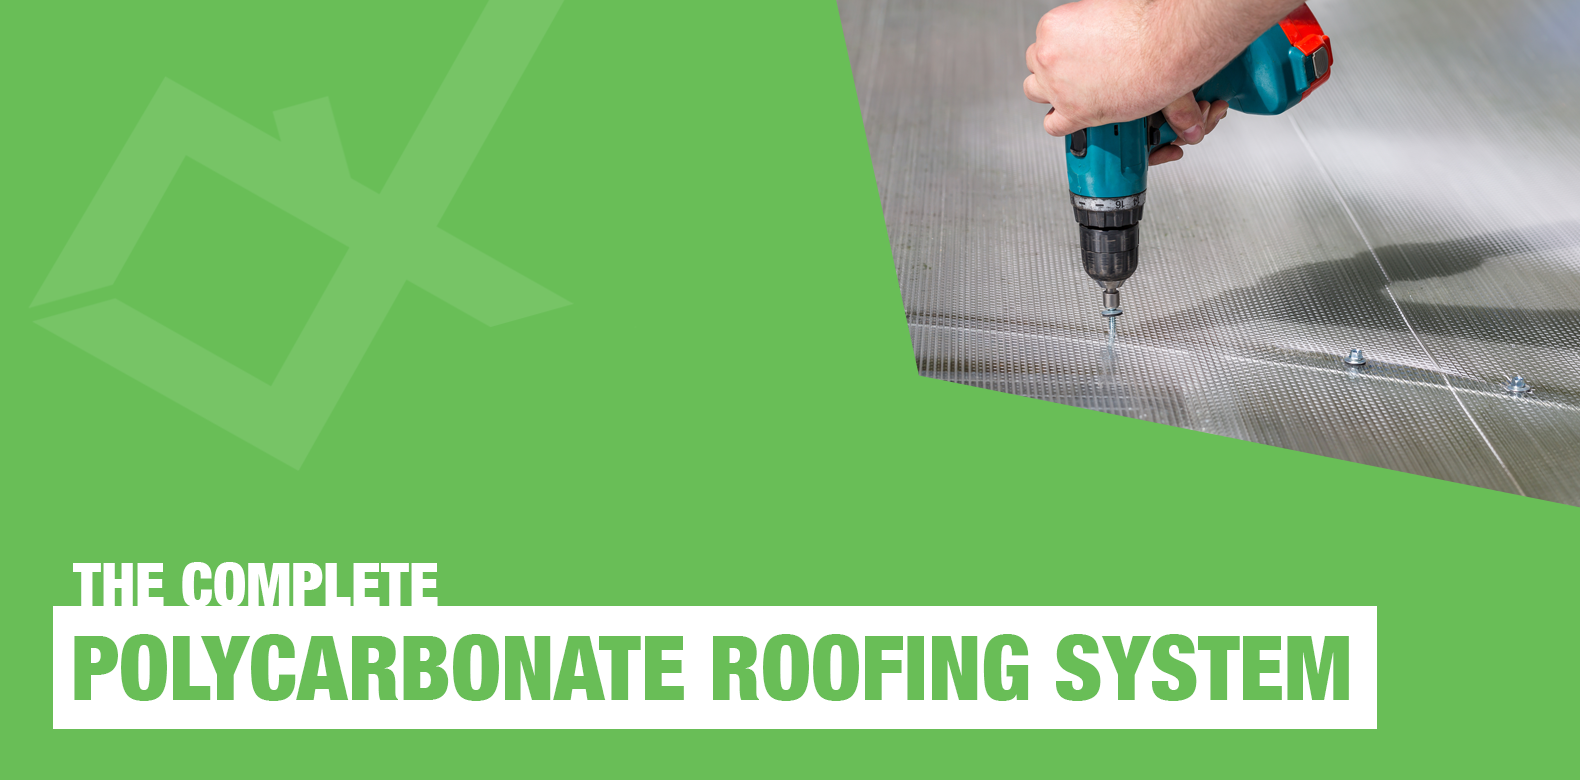 The Complete Polycarbonate Roofing System